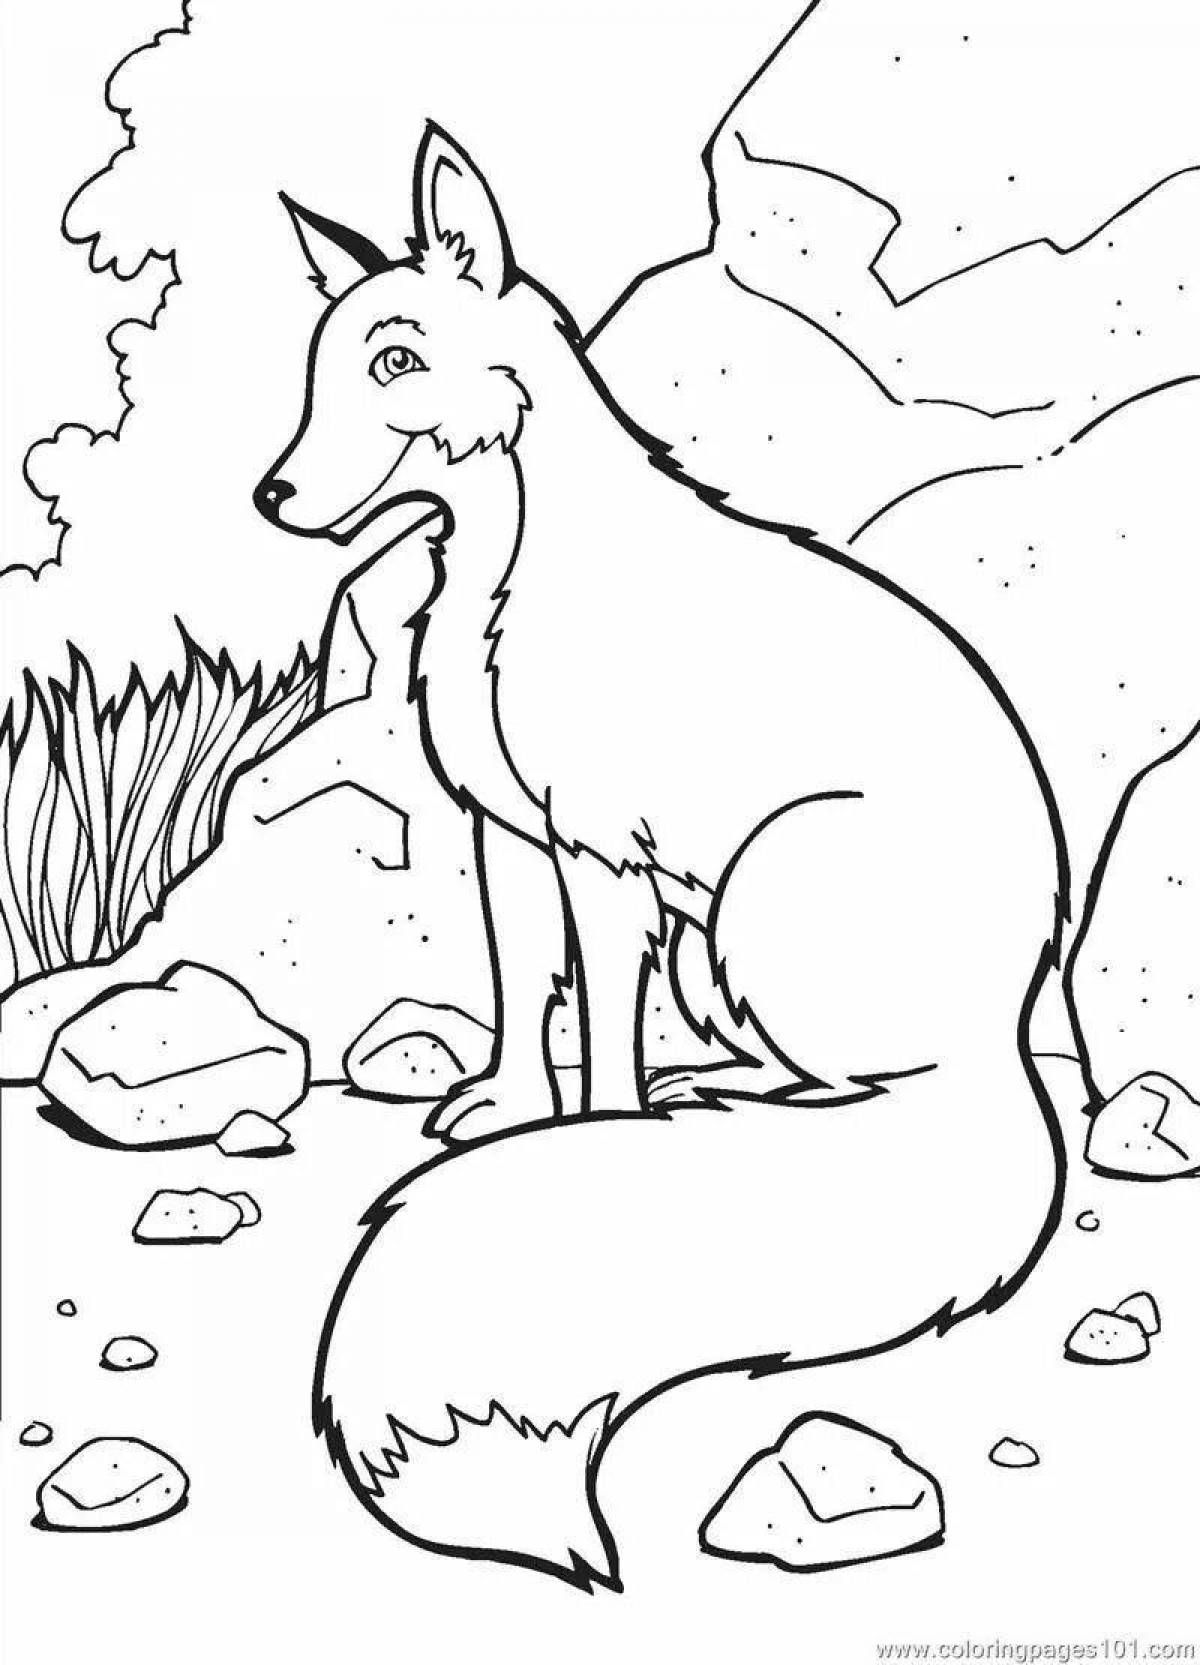 Coloring page charming fox in winter